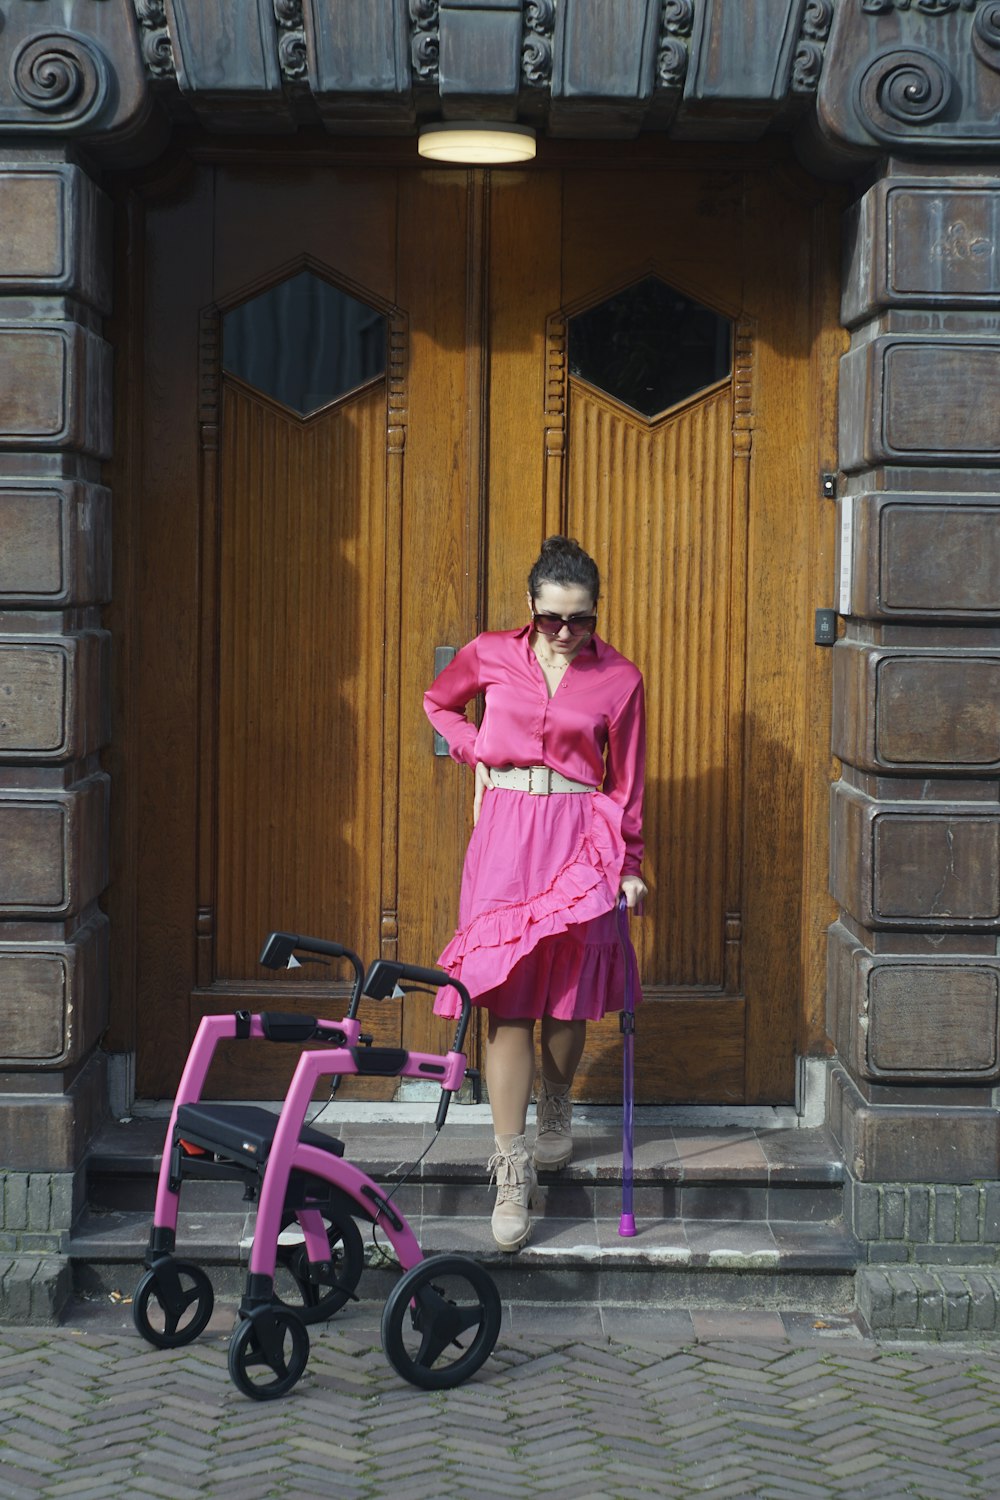 a woman in a pink dress standing in front of a door